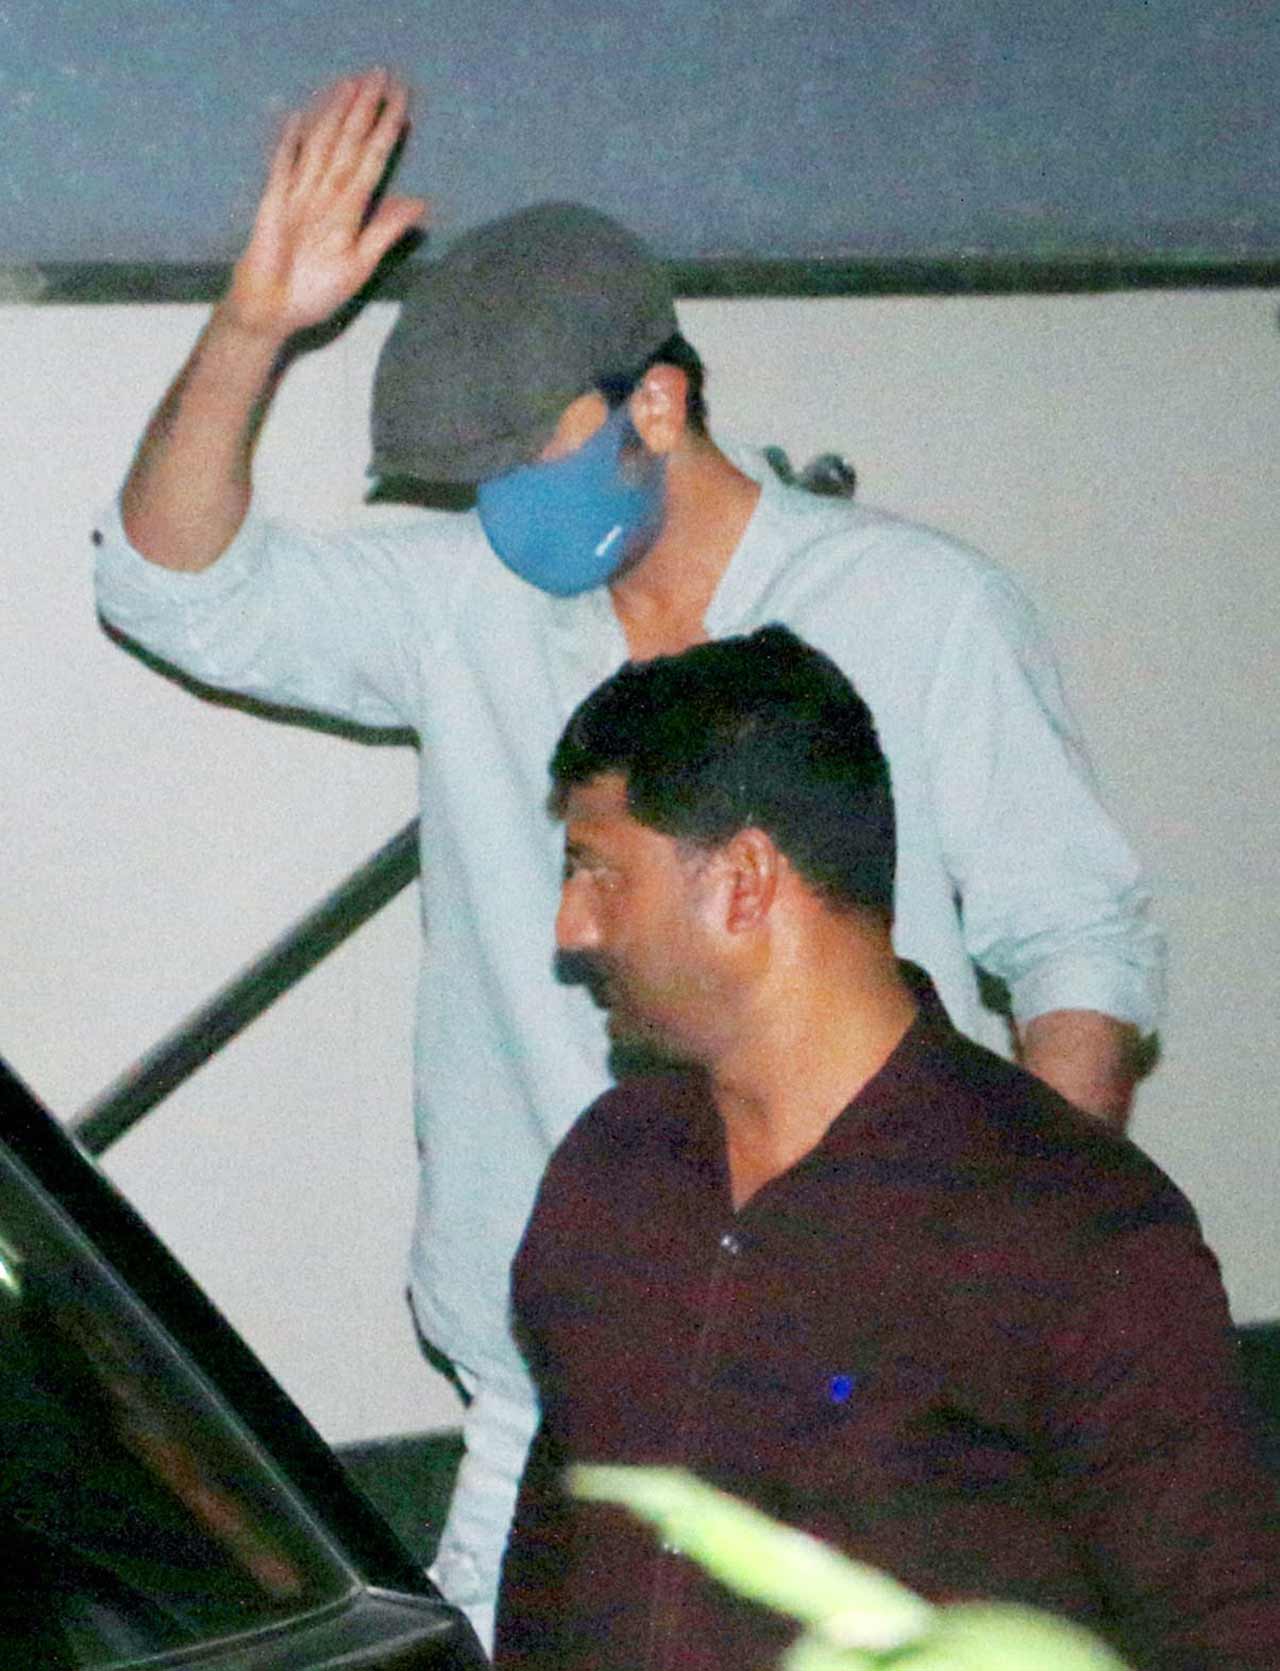 Ranbir Kapoor waved at the shutterbugs when snapped outside his salon in Khar, Mumbai. If the rumours are believed, the ceremonies for the most eagerly awaited wedding in tinsel town are set to begin tomorrow at RK House in Chembur. 